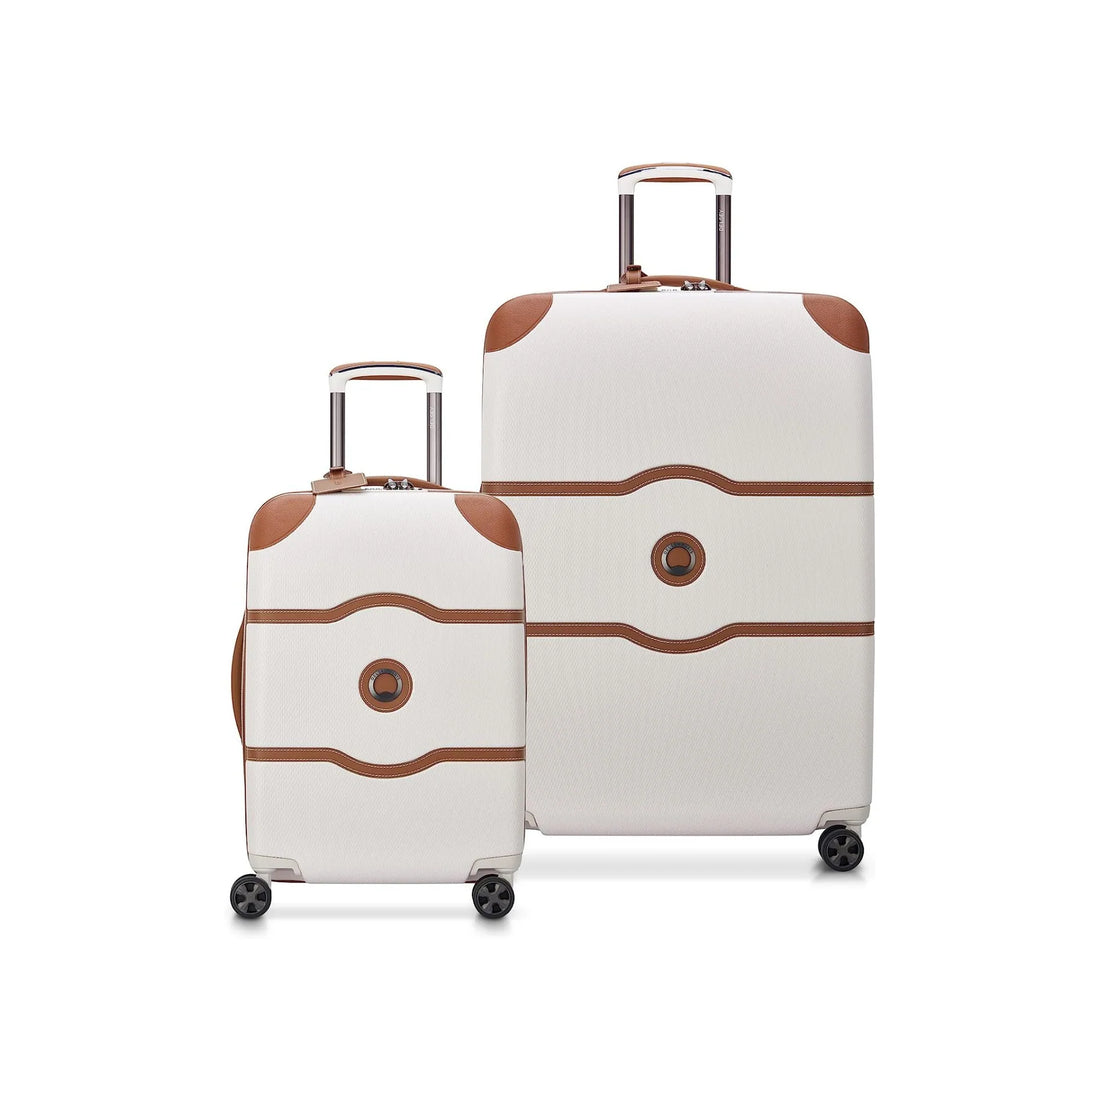 Chatelet Air 2.0 - 2 Piece Travel Sets